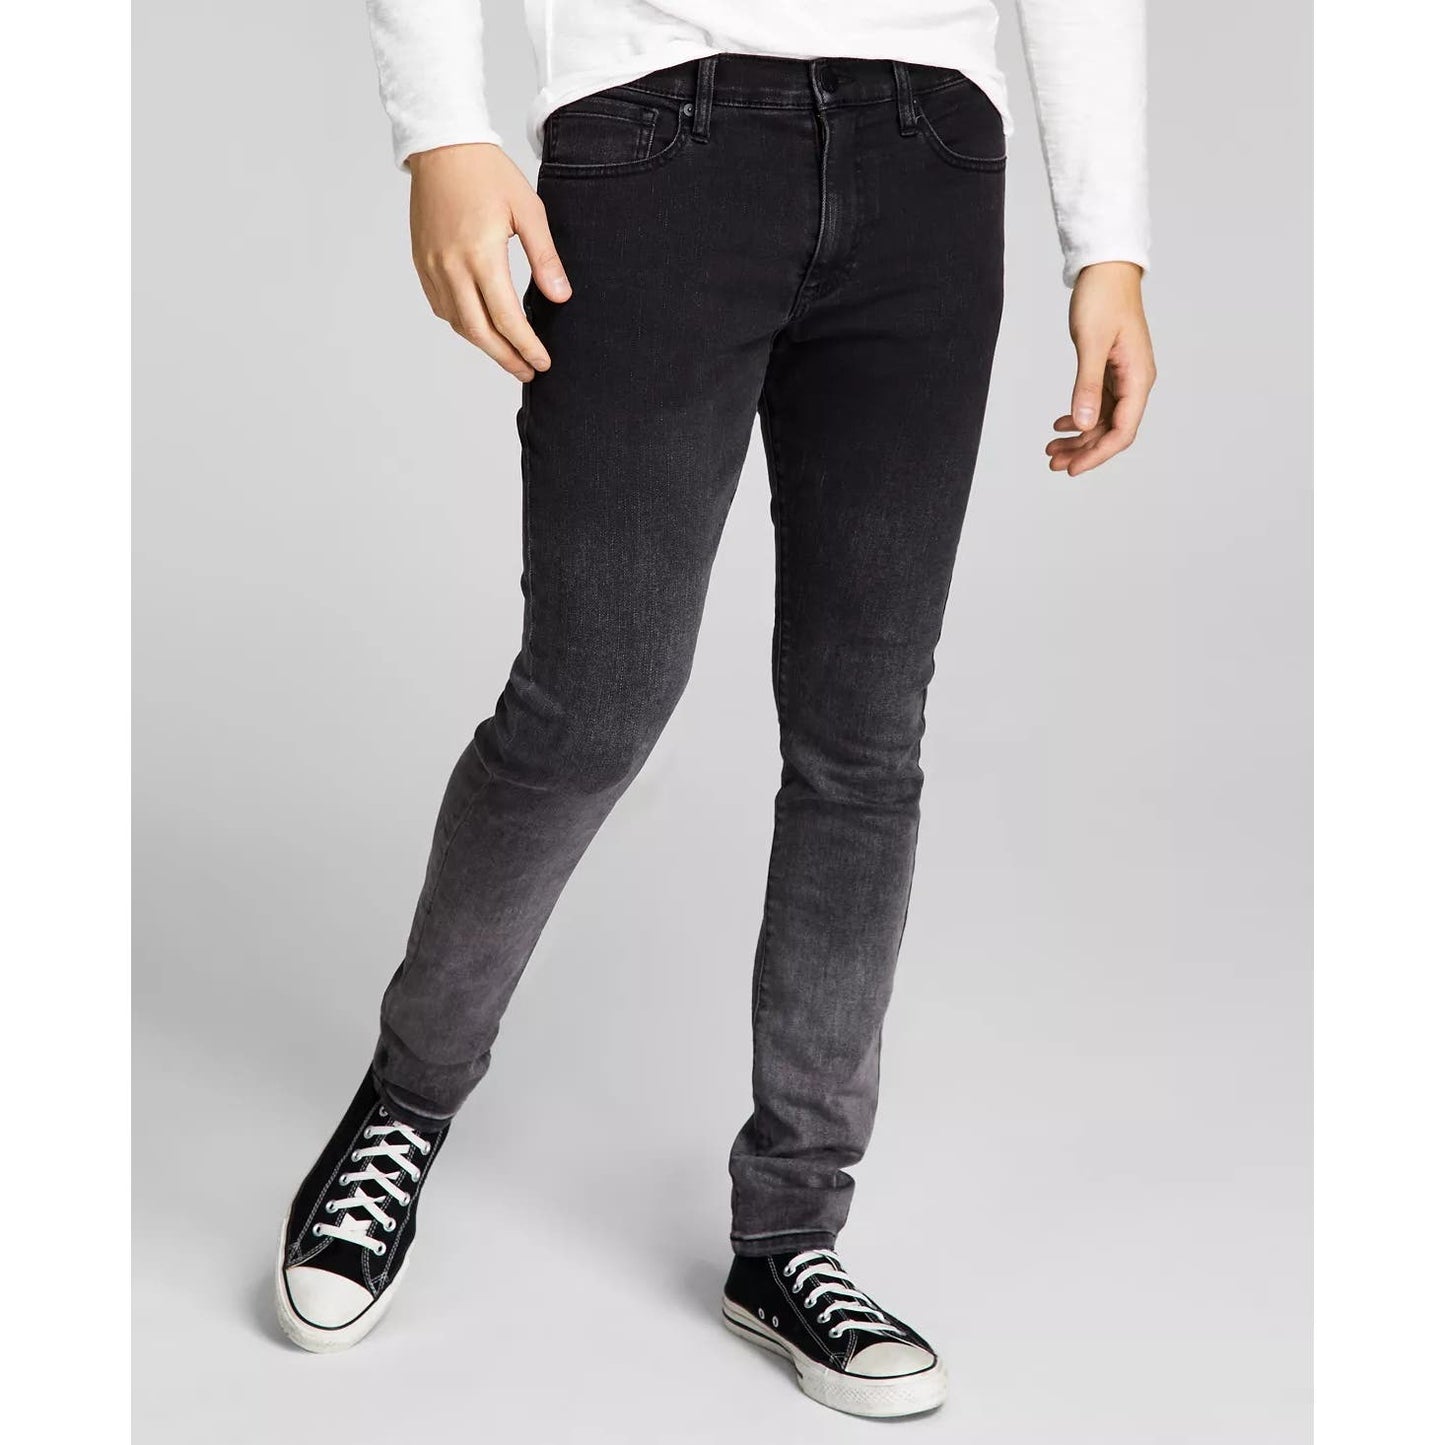 AND NOW THIS Men's Dennett Skinny-Fit Stretch Ombre Fade Denim Jeans